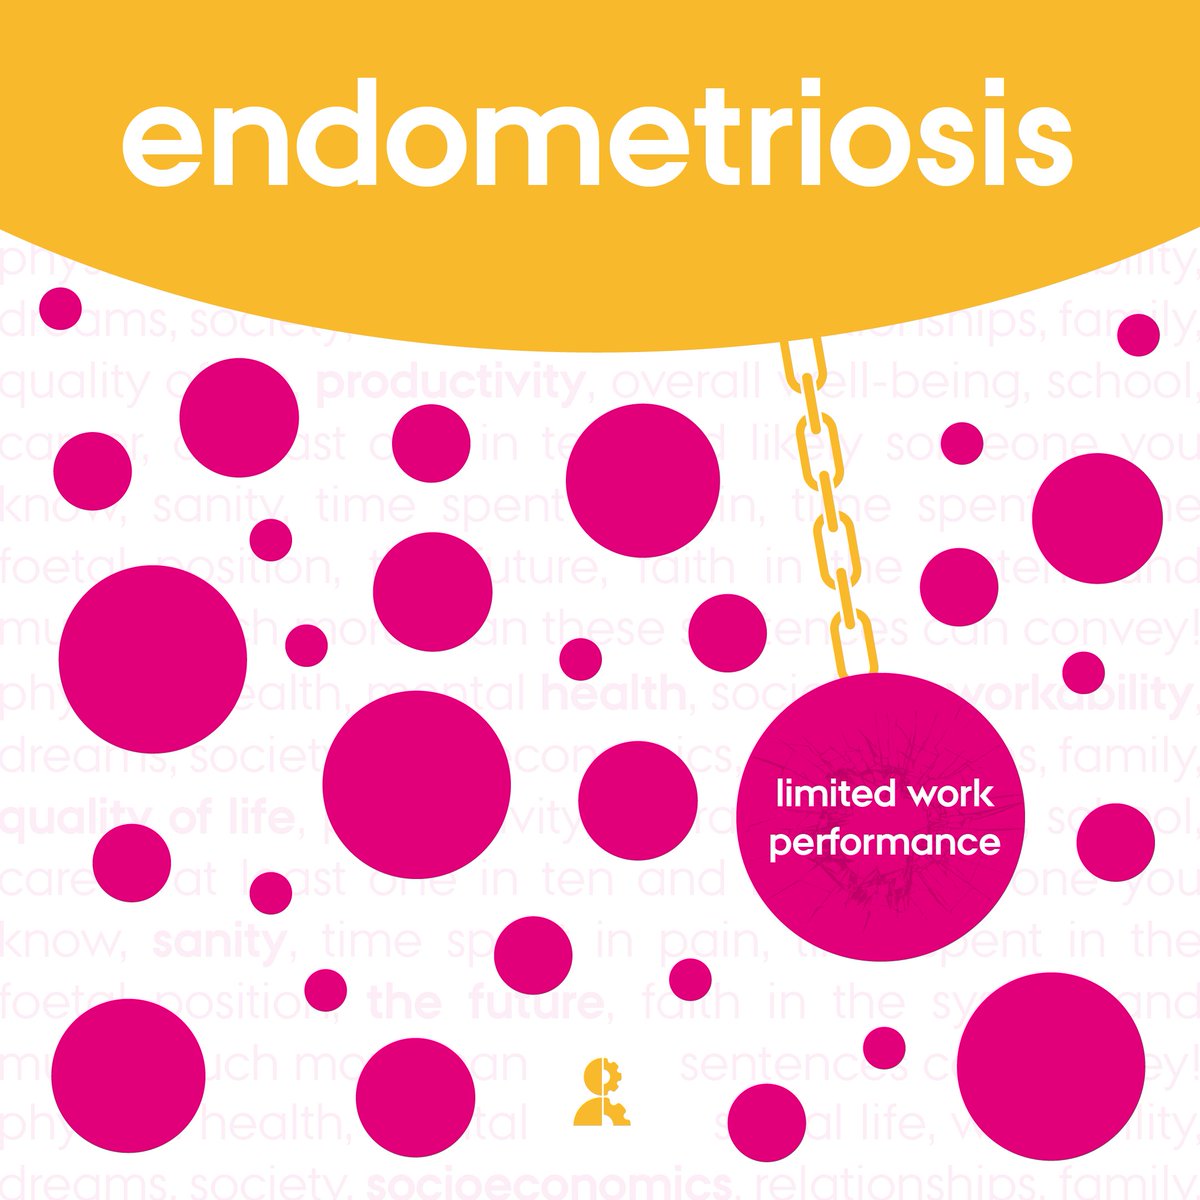 Why is it that #endometriosis, a condition affecting millions, remains so poorly understood in the workplace? How can chronic pain and debilitating fatigue be so easily dismissed? Such questions linger whilst grappling with the impact of endometriosis on work performance.